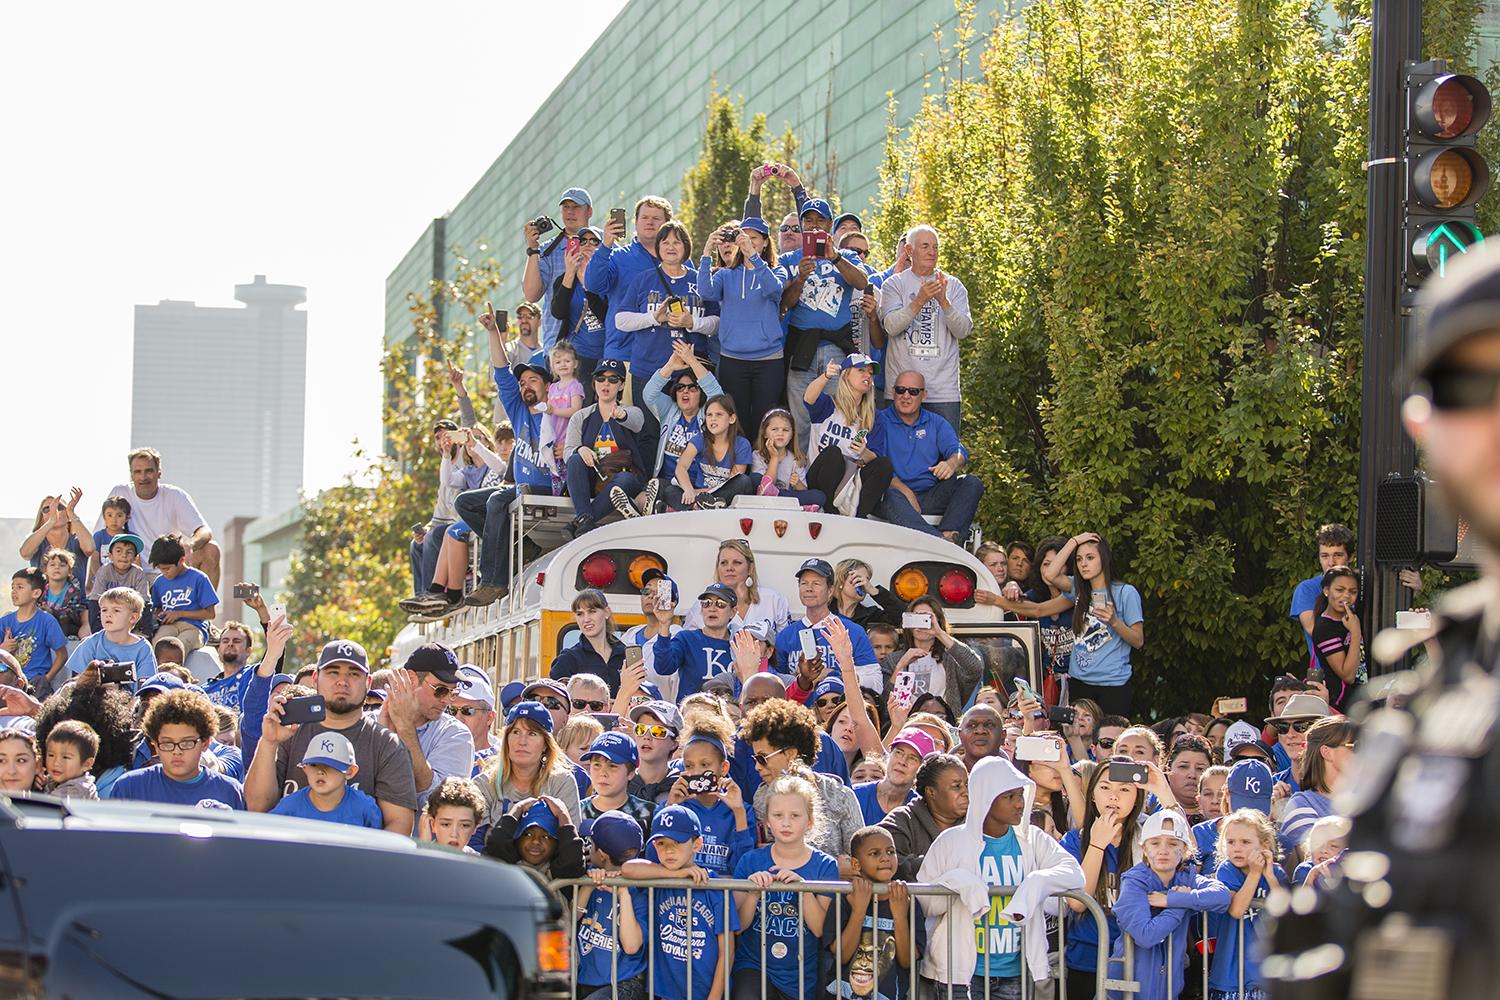 World Series parades date back more than 100 years